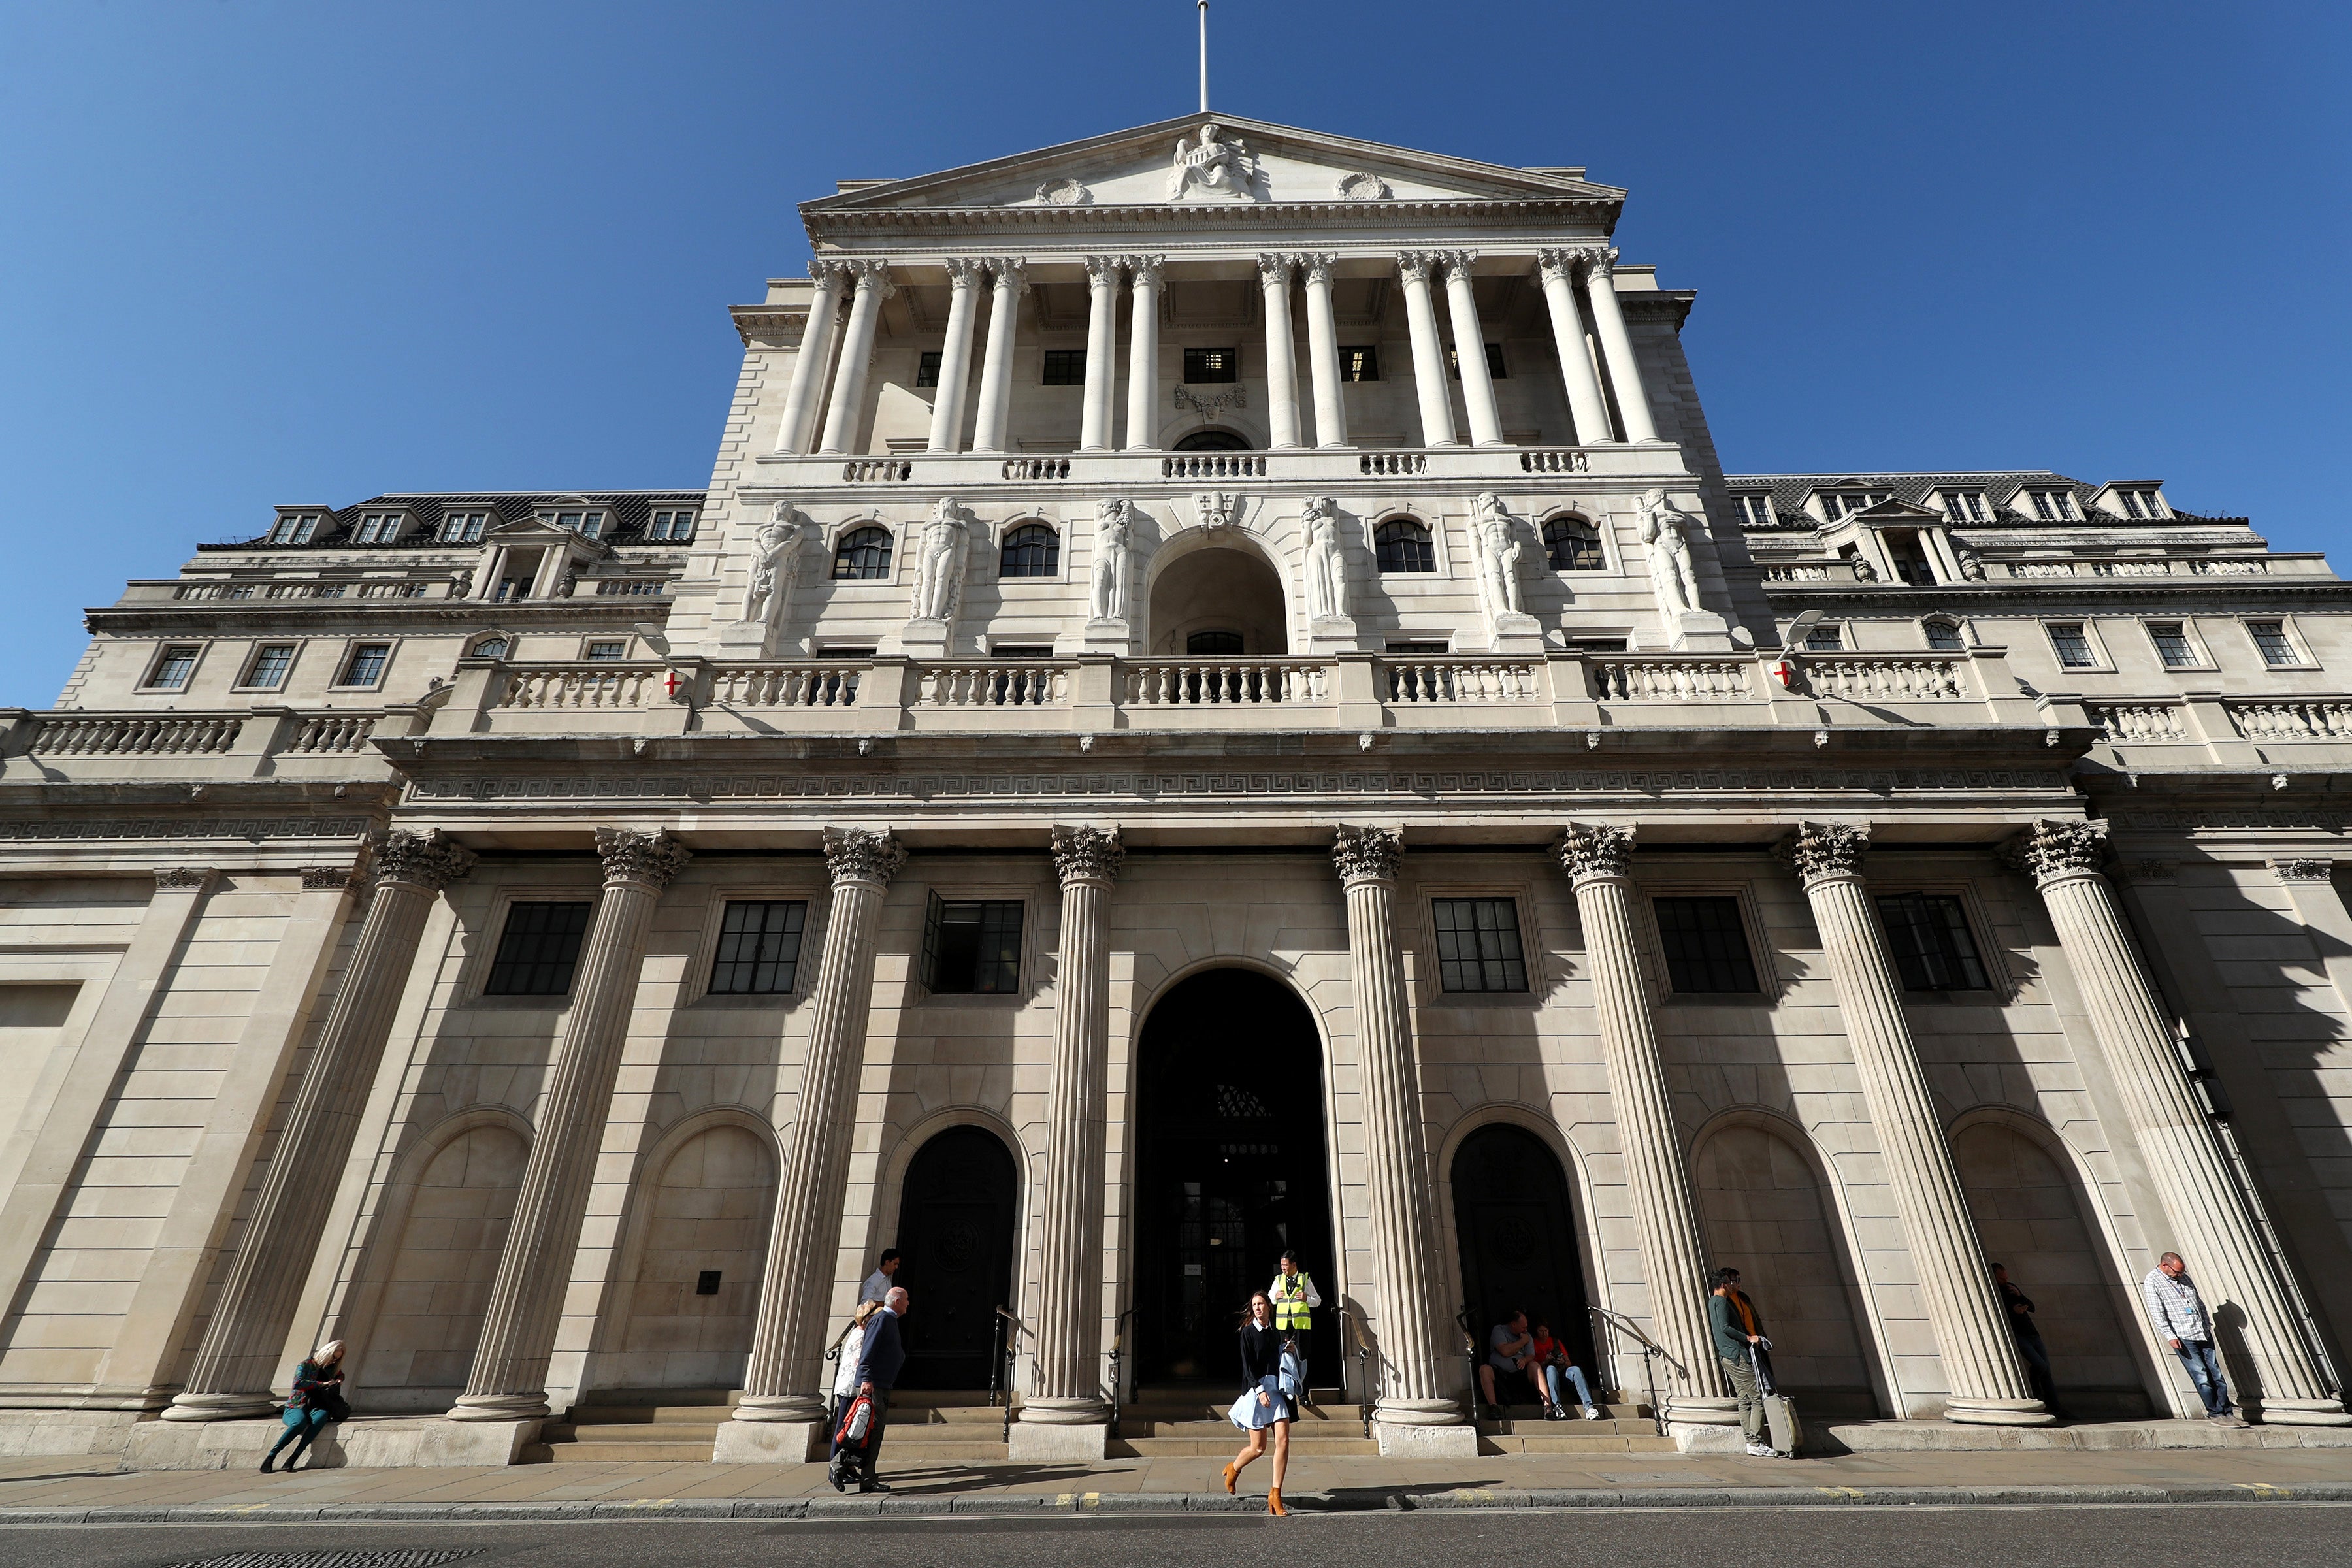 The Bank has held off from raising interest rates despite warning over soaring inflation, but said a hike is likely in the ‘coming months’ to cool price rises